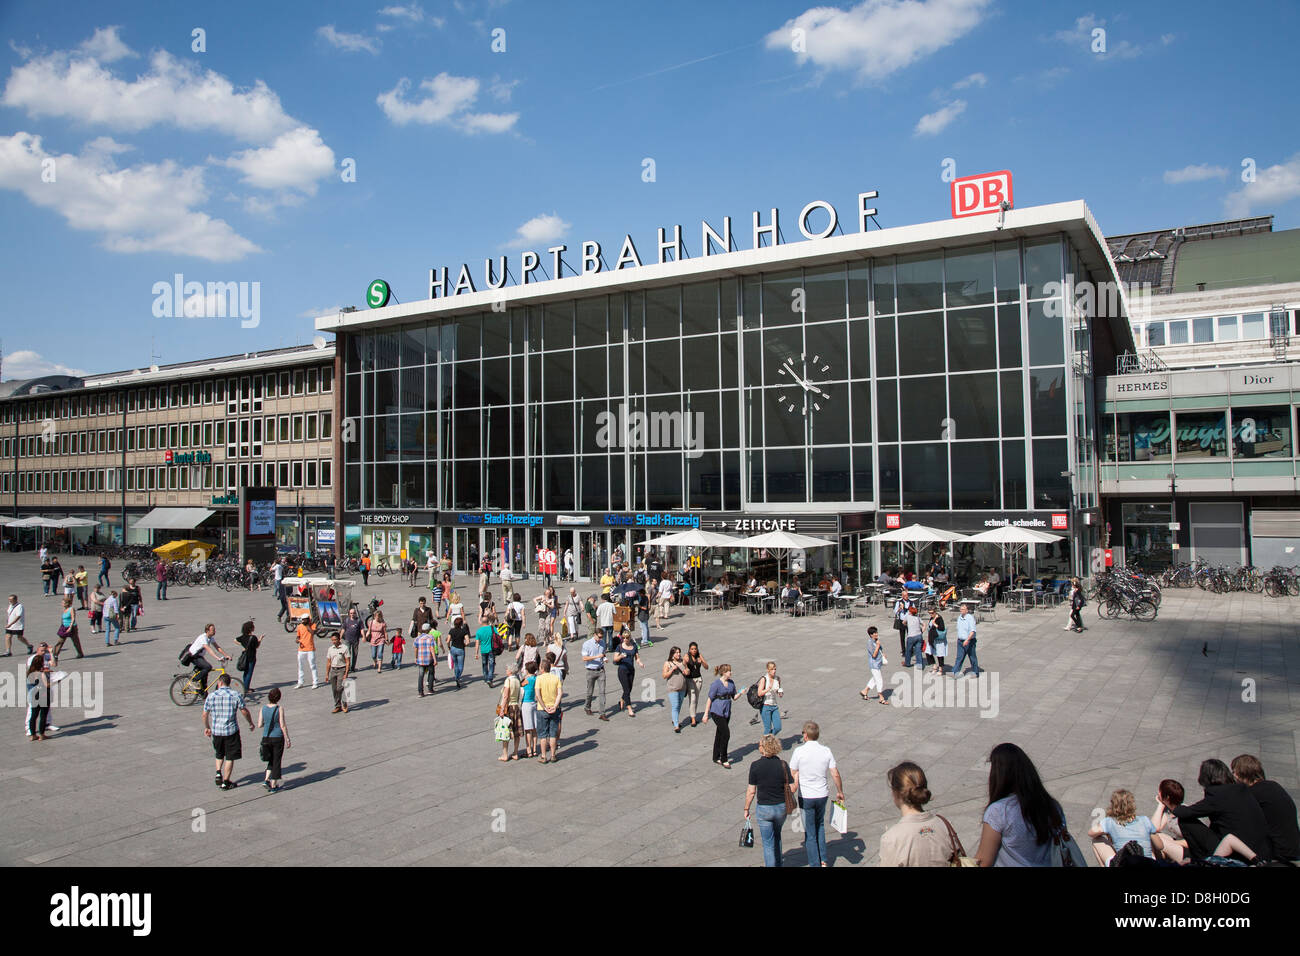 Koeln Hauptbahnhof, Cologne Central Station, Cologne, Germany Stock Photo